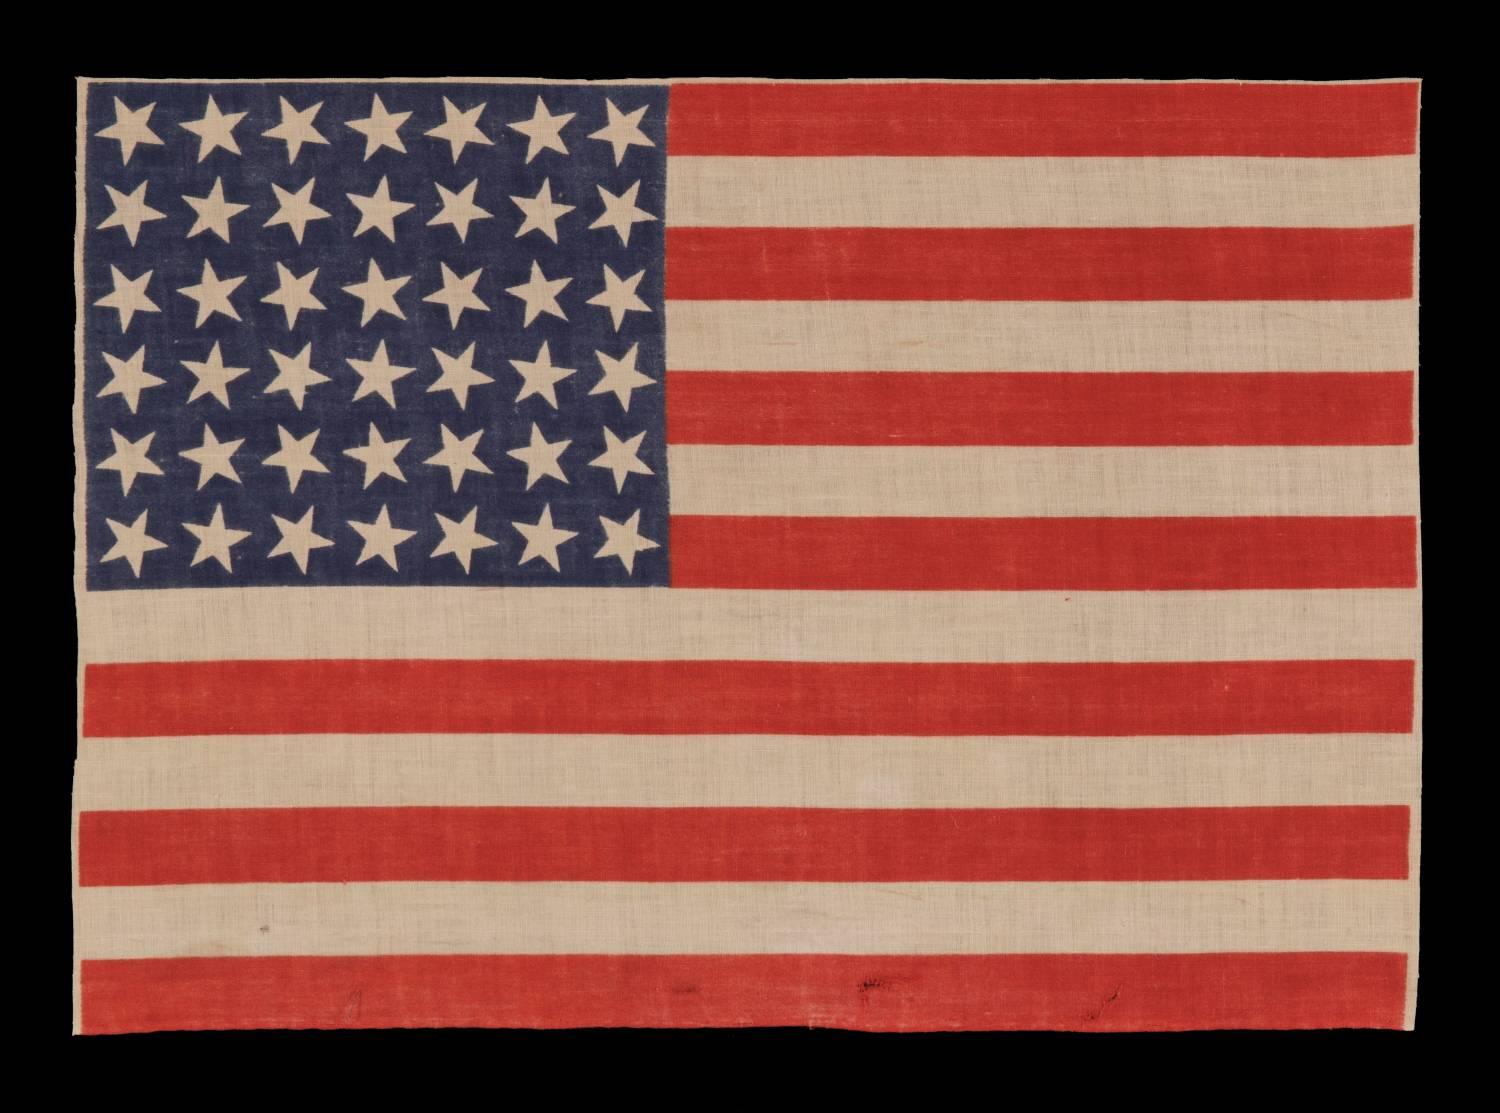 42 stars, 1889-1890, an unofficial star count, Washington statehood, scattered star positioning

42 star parade flag, printed on cotton muslin. The stars are arranged in a rectilinear fashion, but vary in position on their vertical axis. This adds